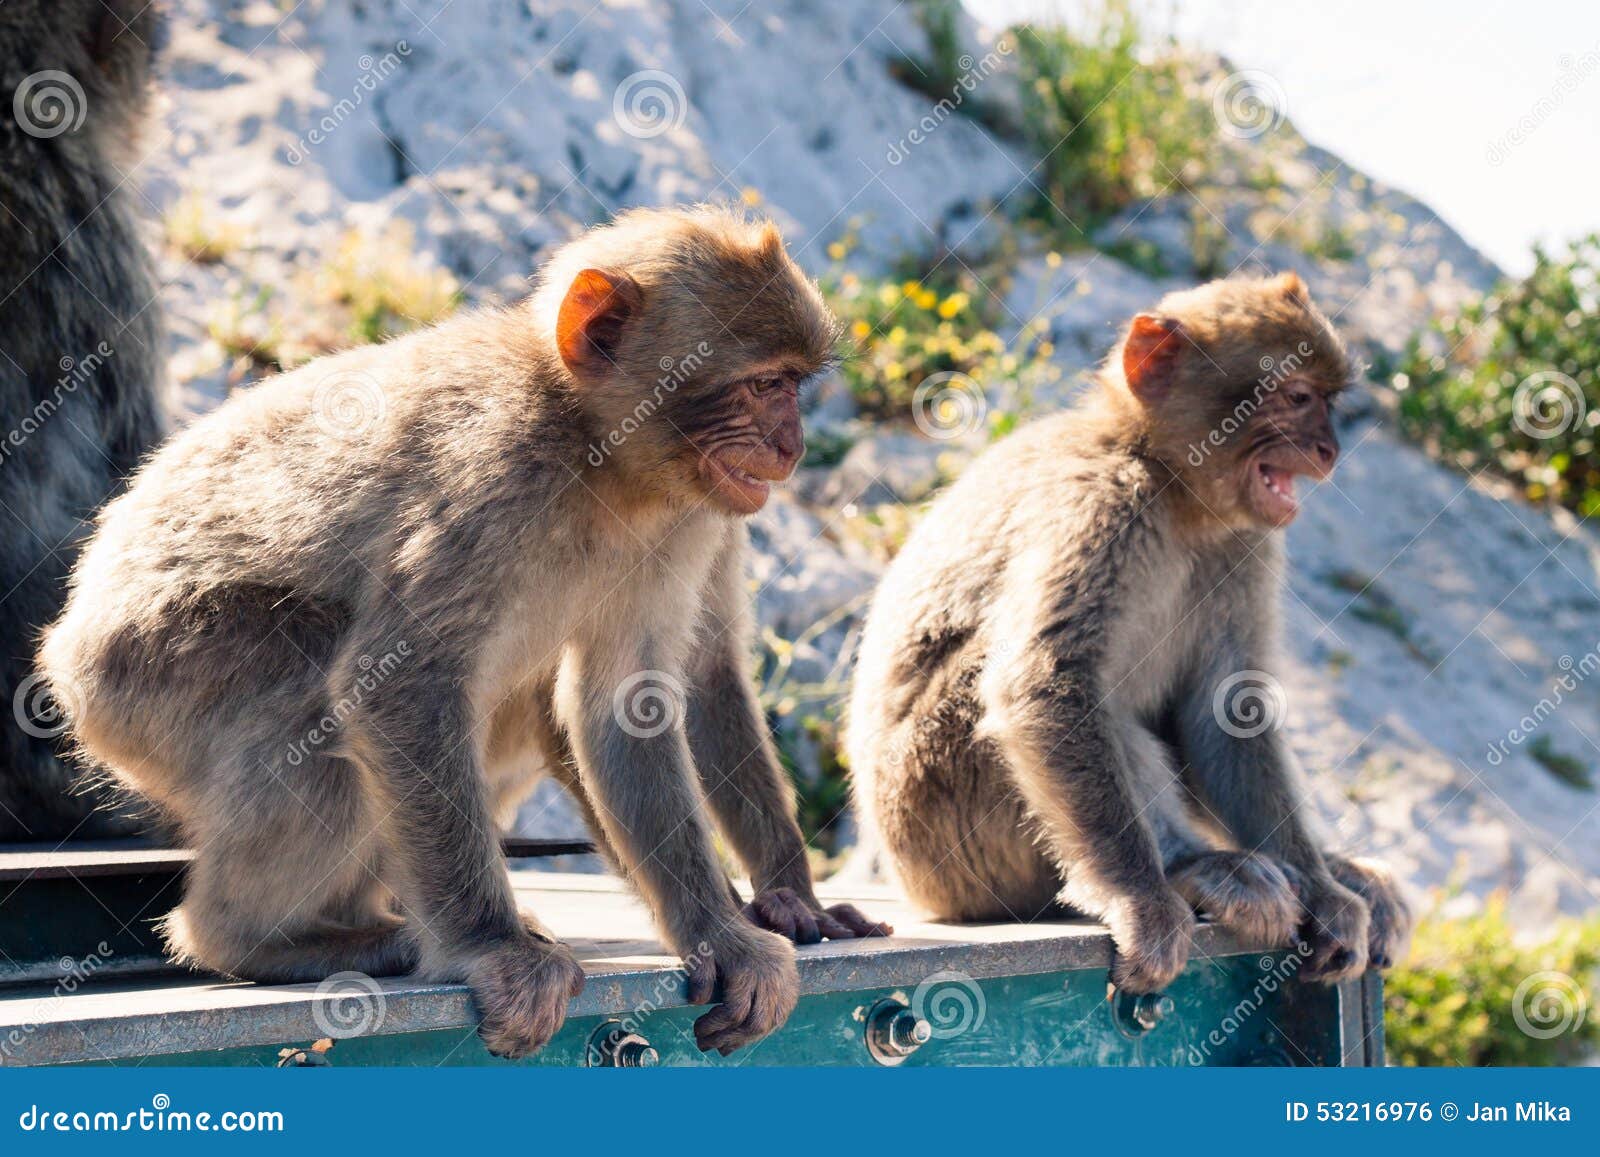 barbary macaques